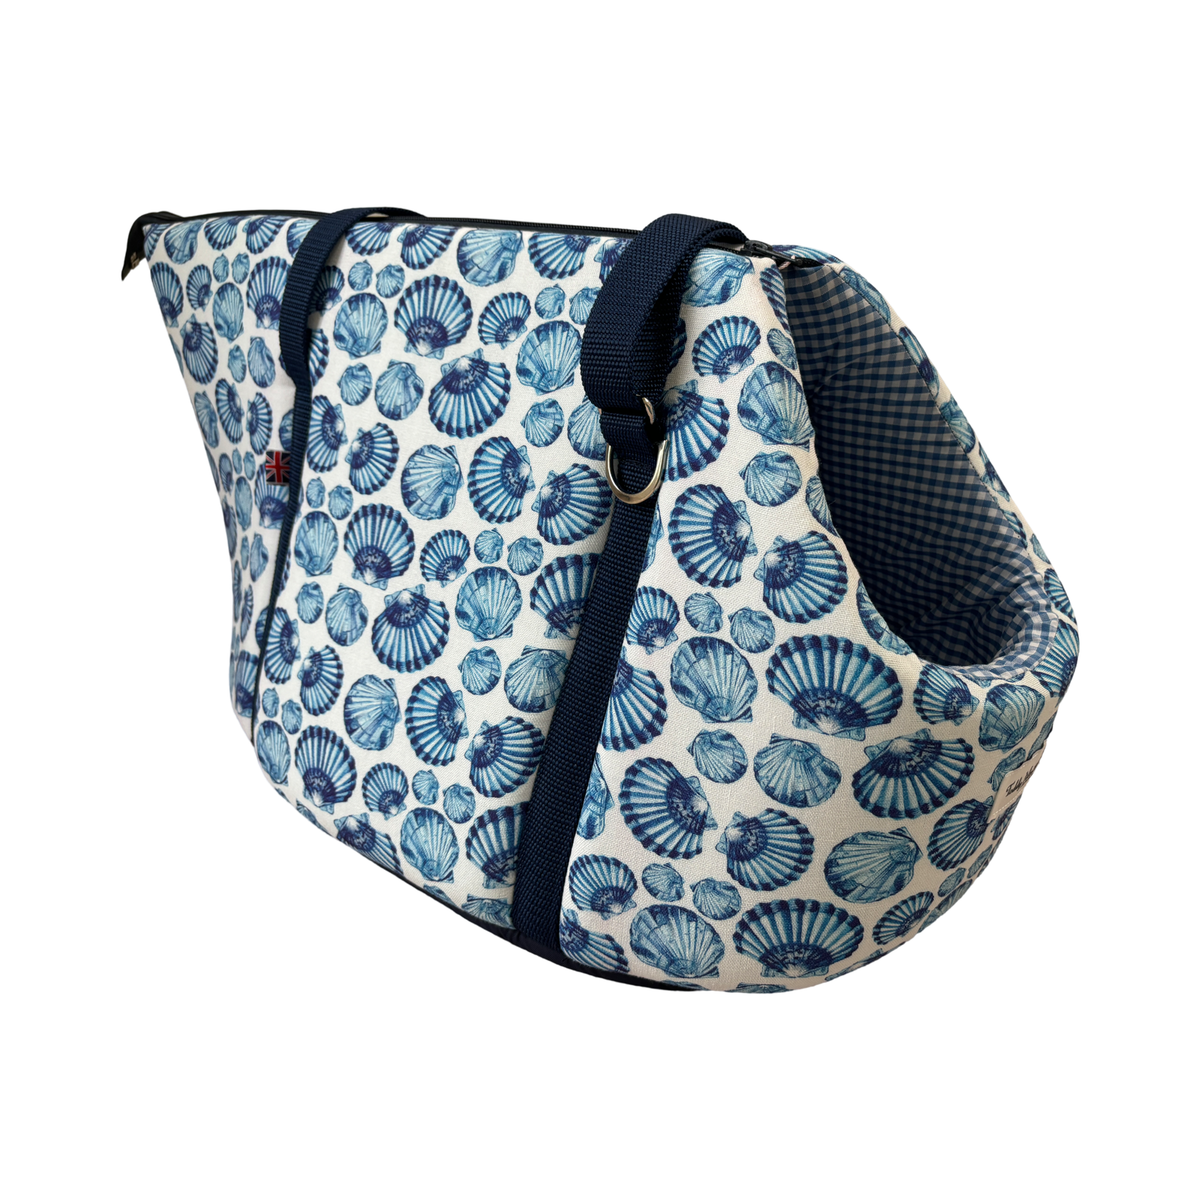 'The Cornwall' Seashells Dog Carrier - Limited Edition!